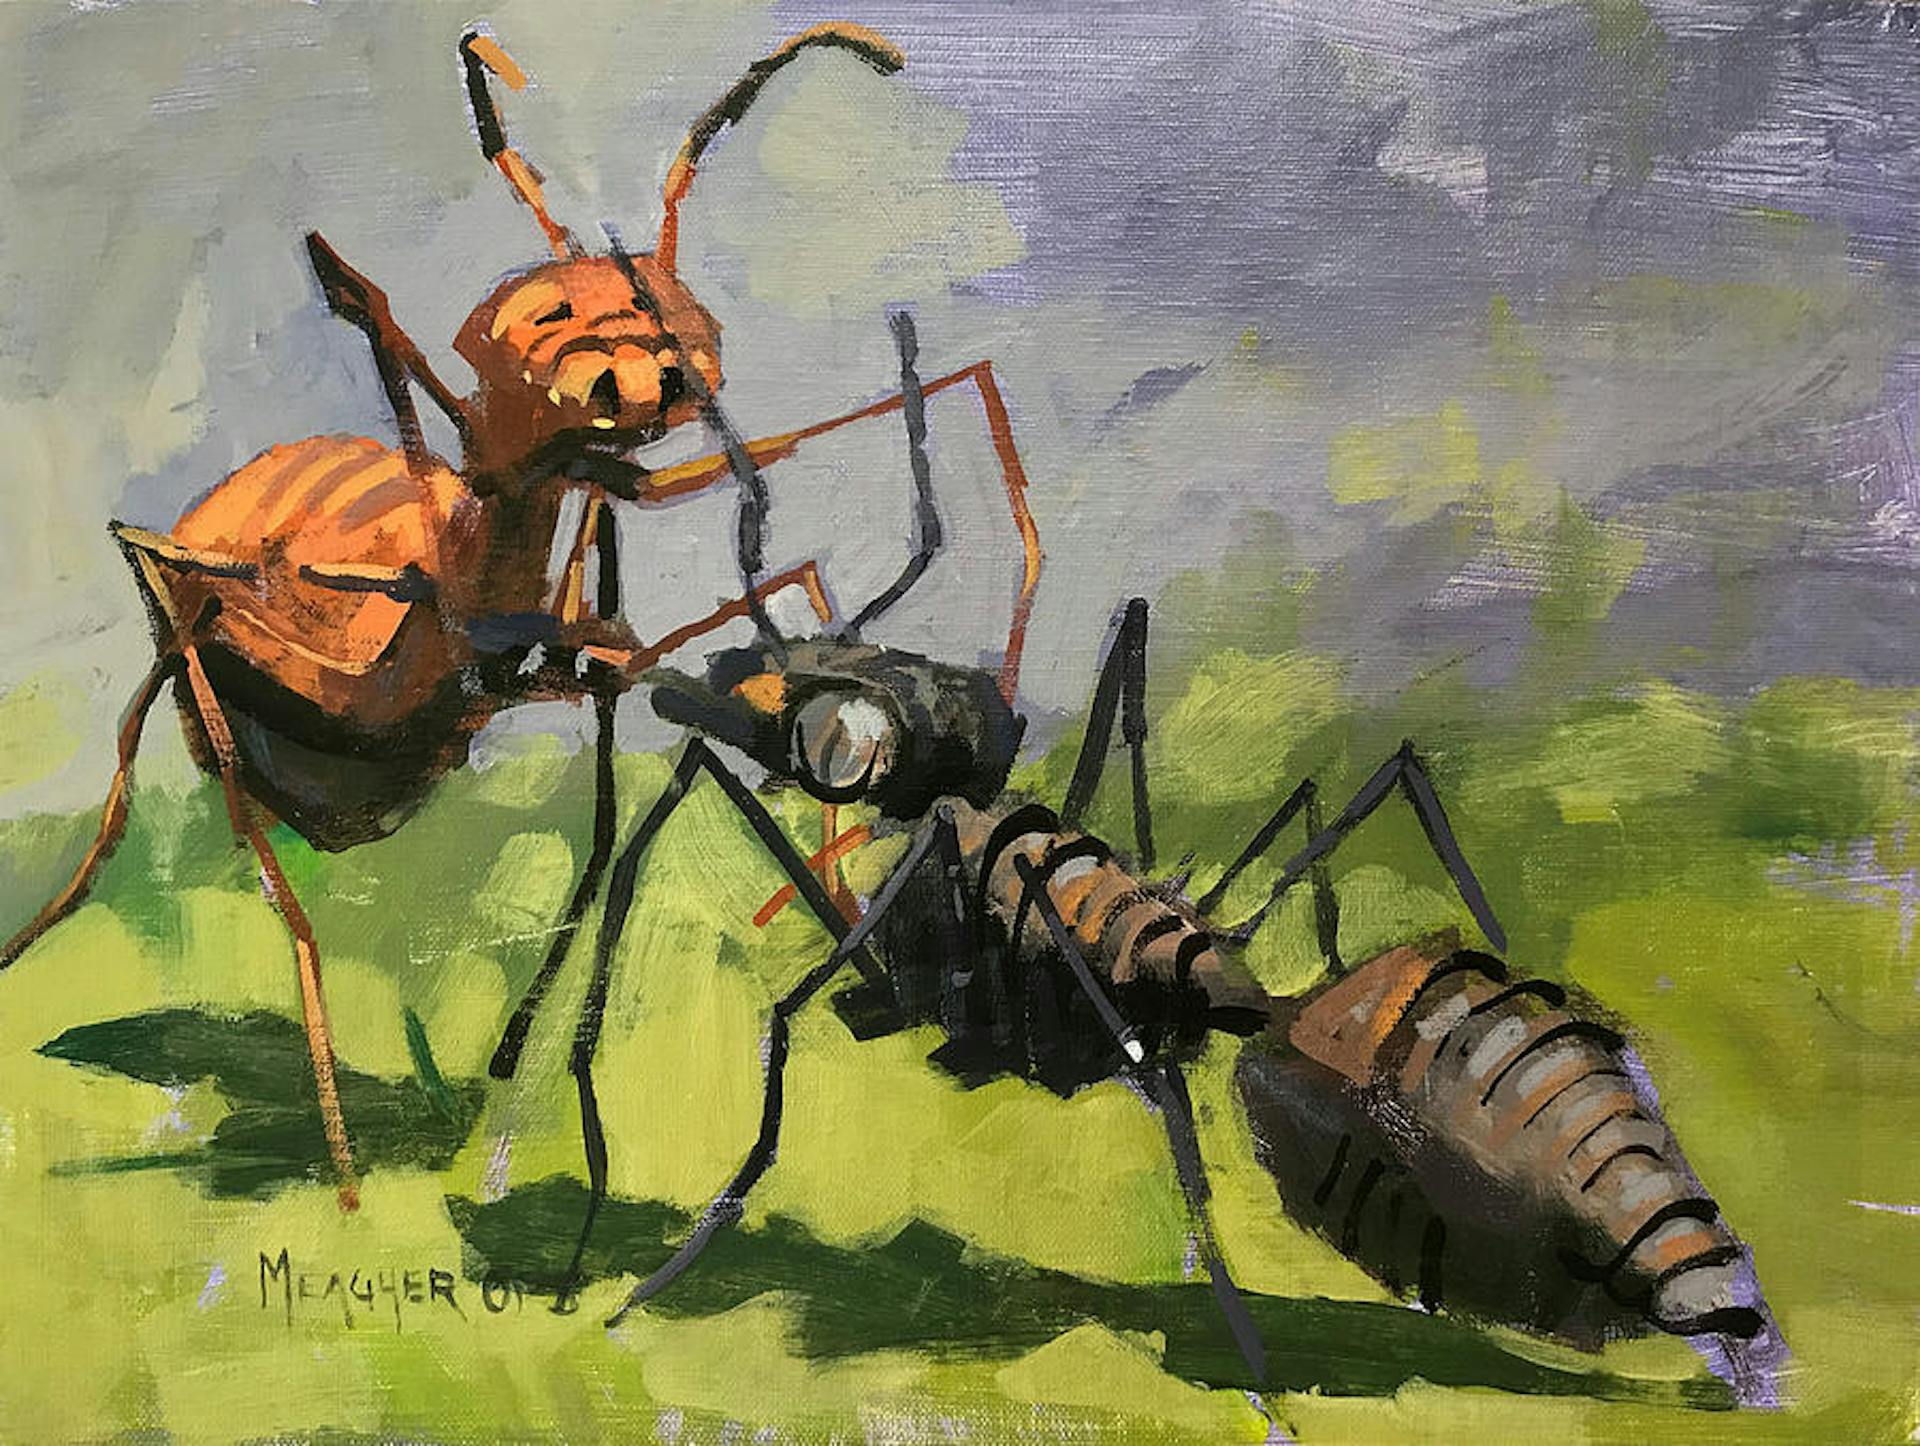 https://fineartamerica.com/featured/ants-spencer-meagher.html